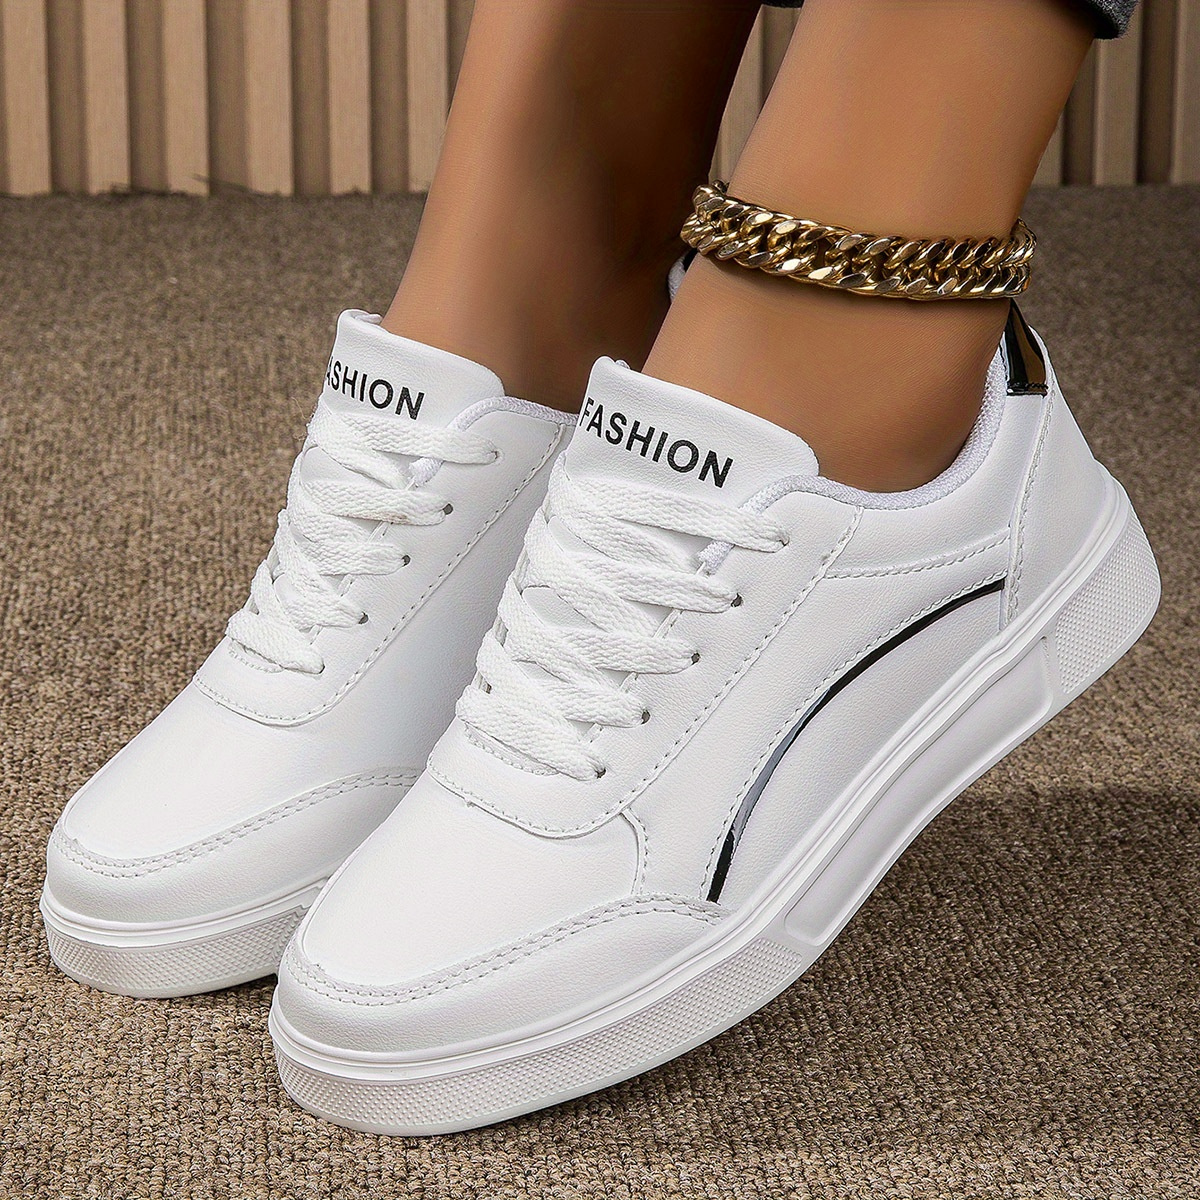 

Women's Trendy Faux Leather Flat Heighten Skate Shoes, Wear Resistance Non Slip Lace Up Sneakers